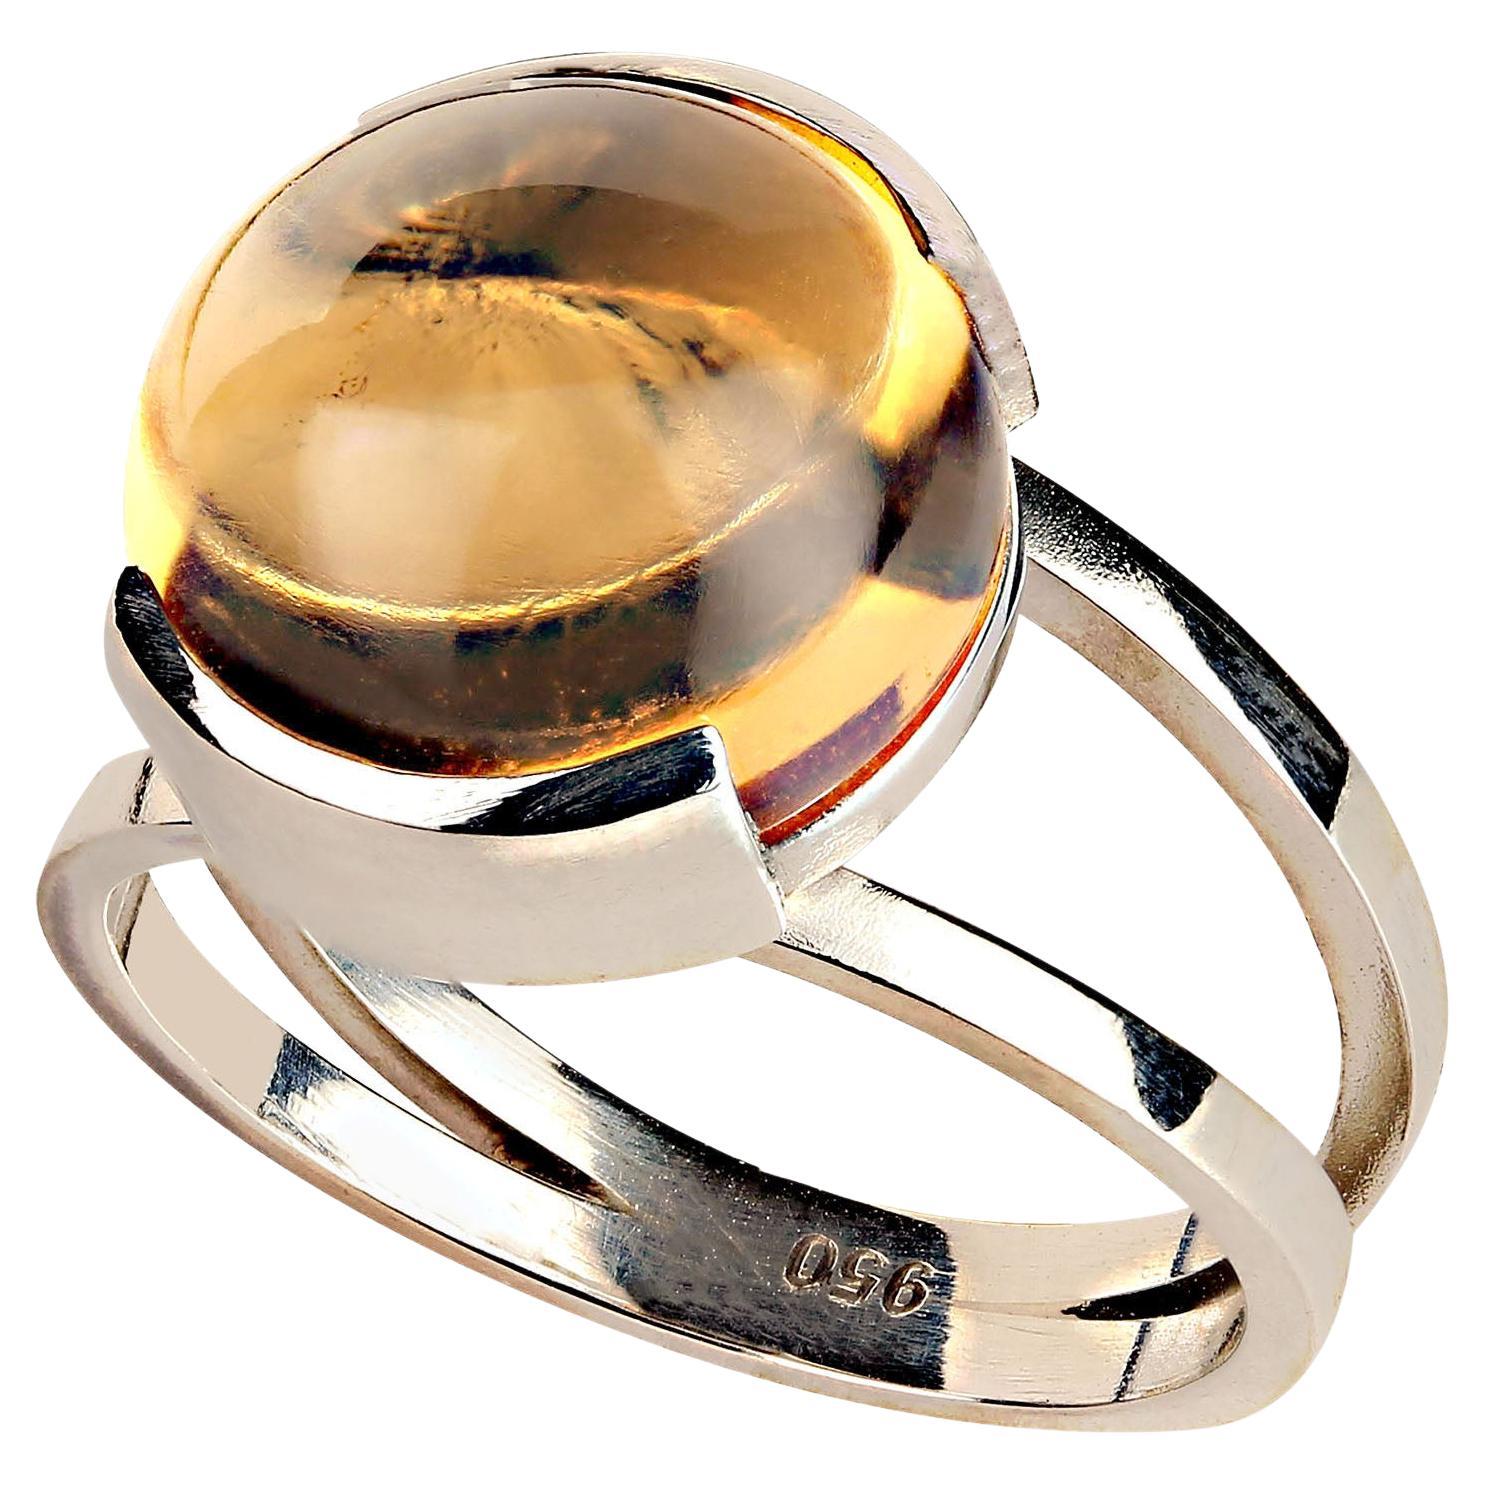 AJD 8.7 Carat Unusual Round Cabochon Citrine in Stering Silver Ring